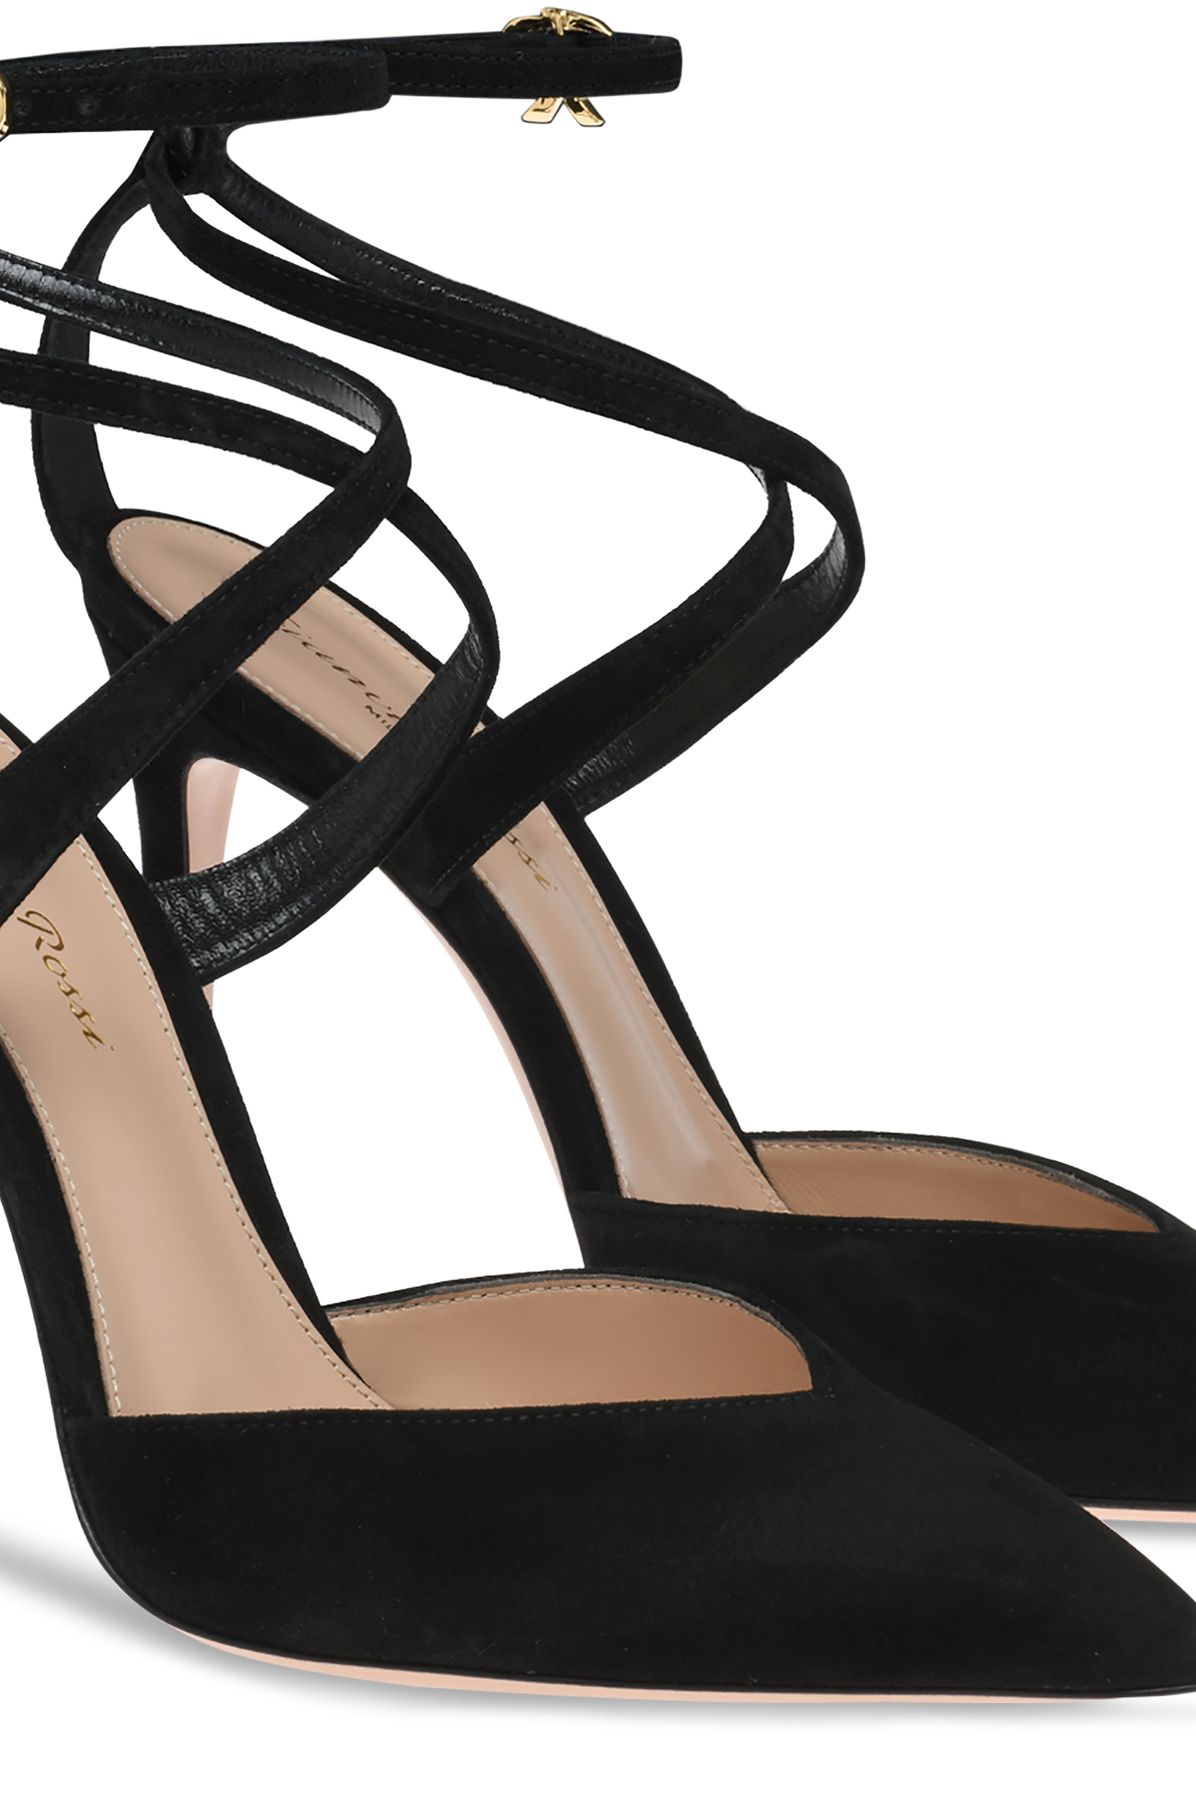 Gianvito Rossi Marion Court shoes